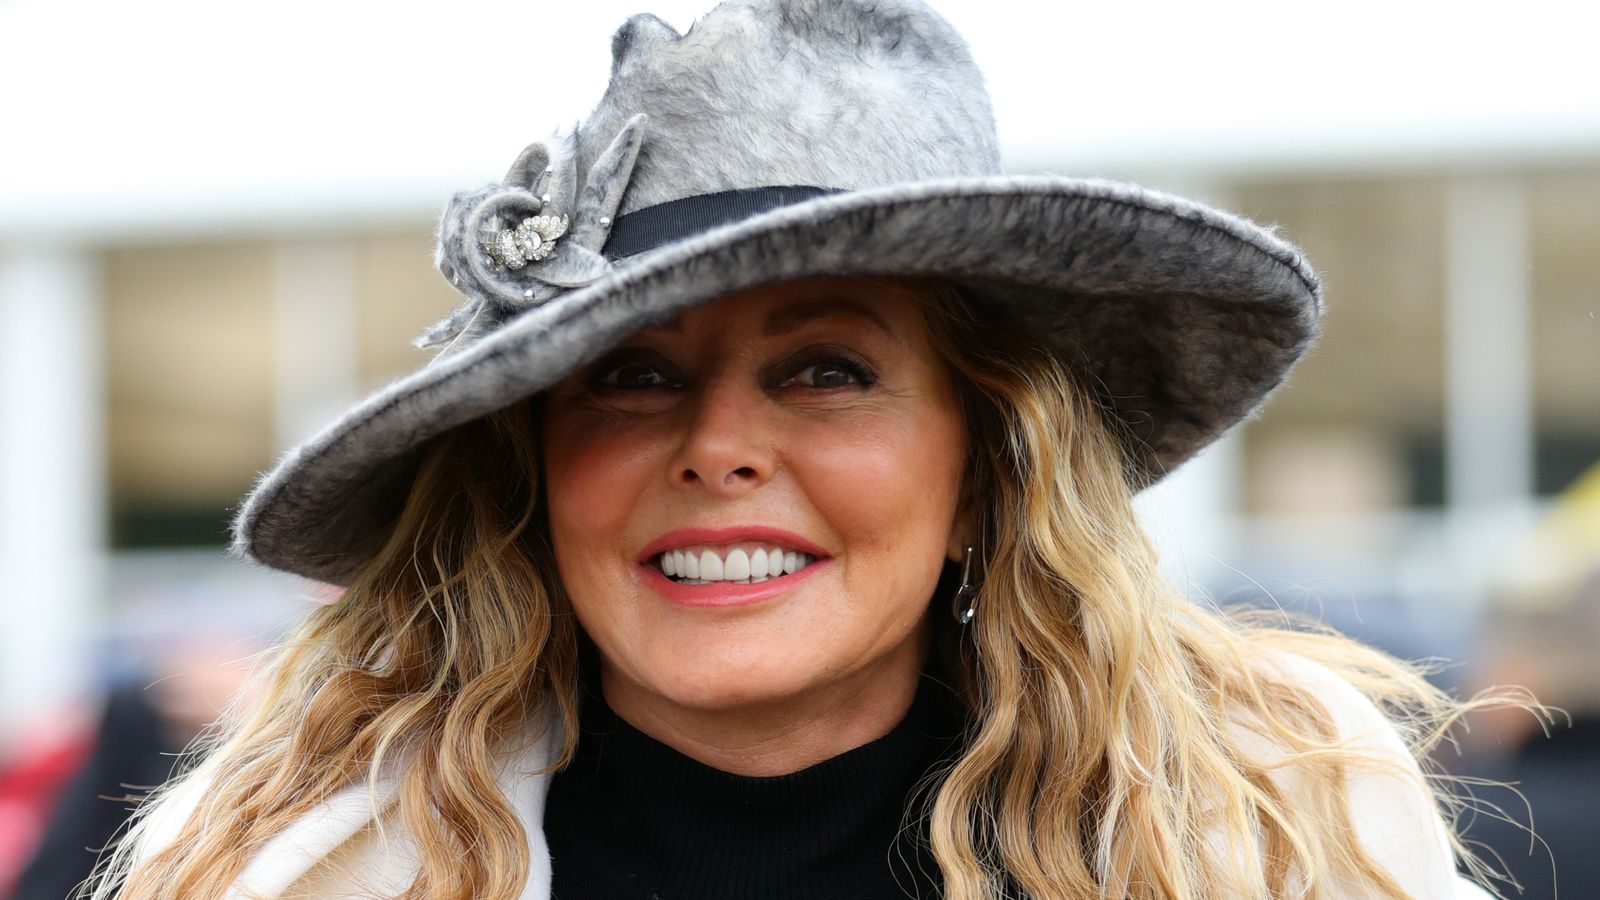 Carol Vorderman thanks 'bloody marvellous' fans after leaving BBC show over social media guidelines